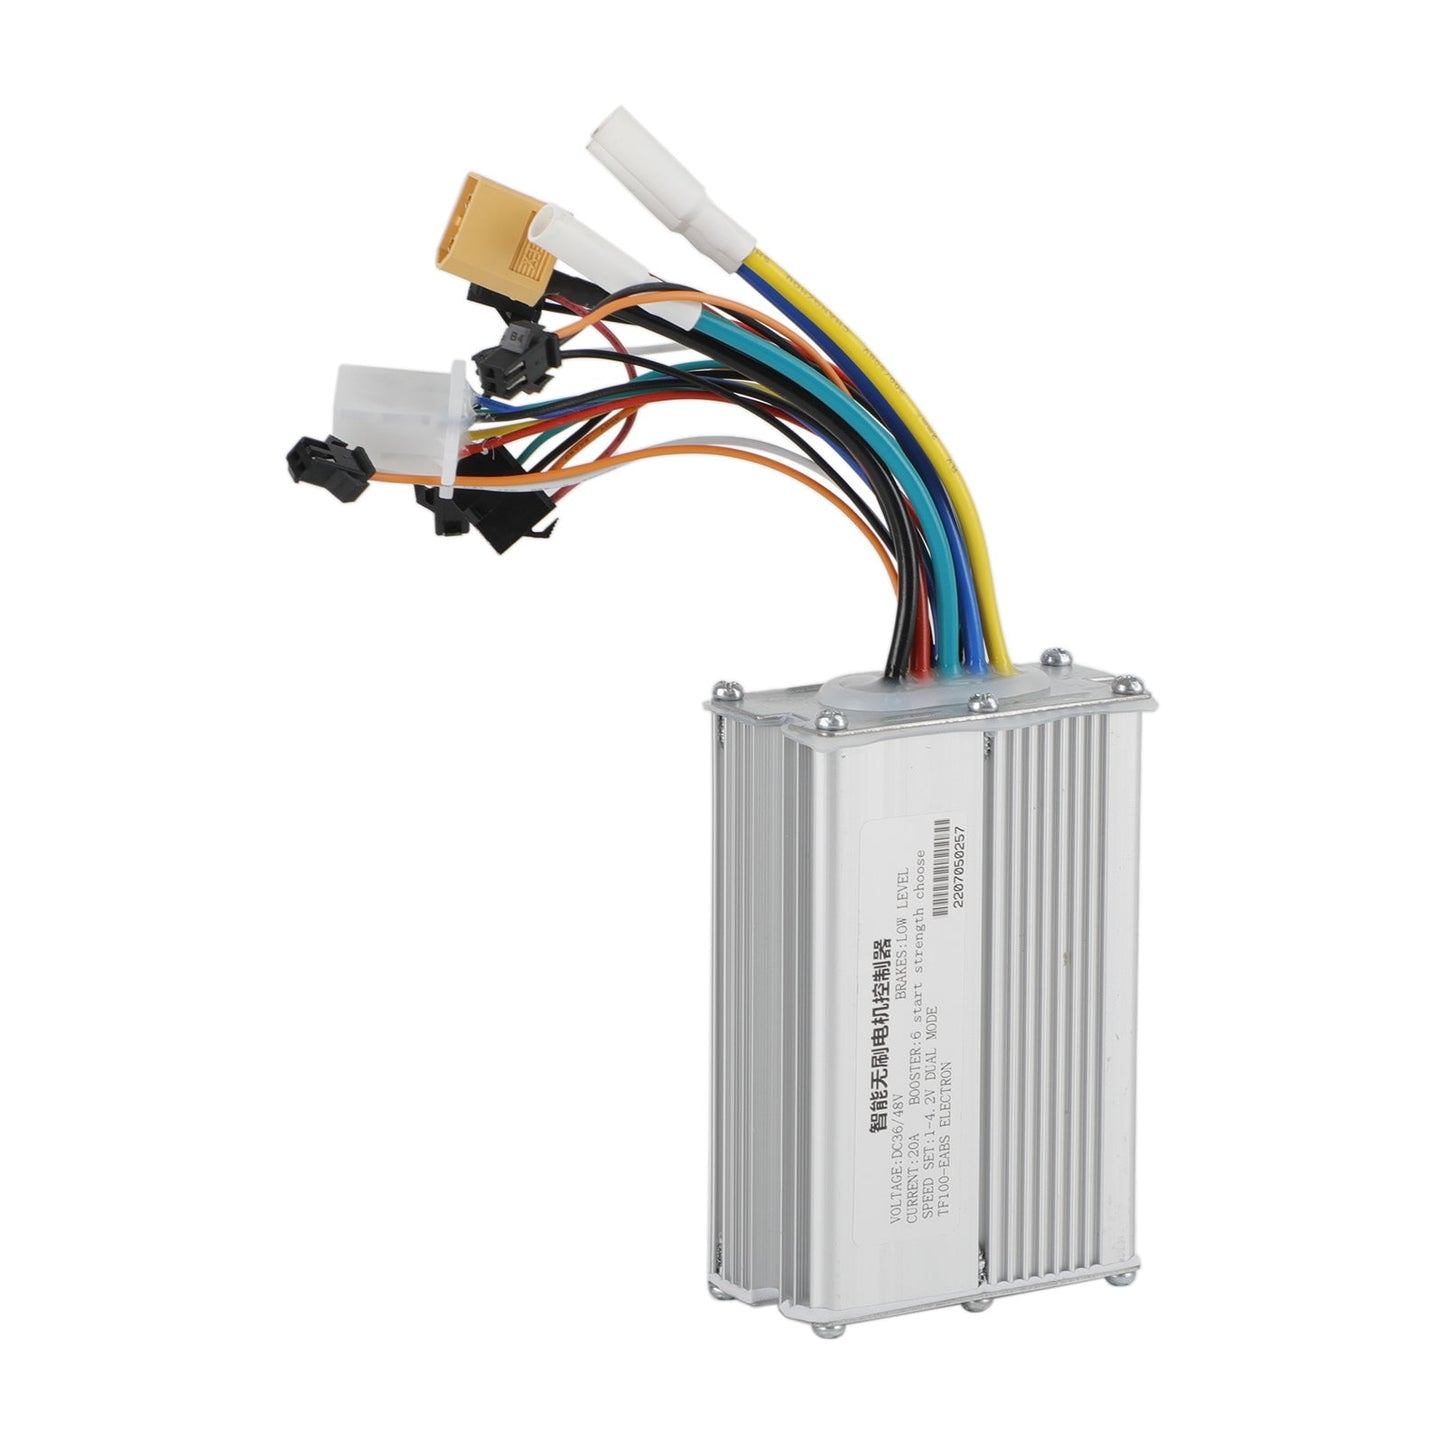 48V 20A Electric Scooter Motor Controller For 10" Kugoo M4